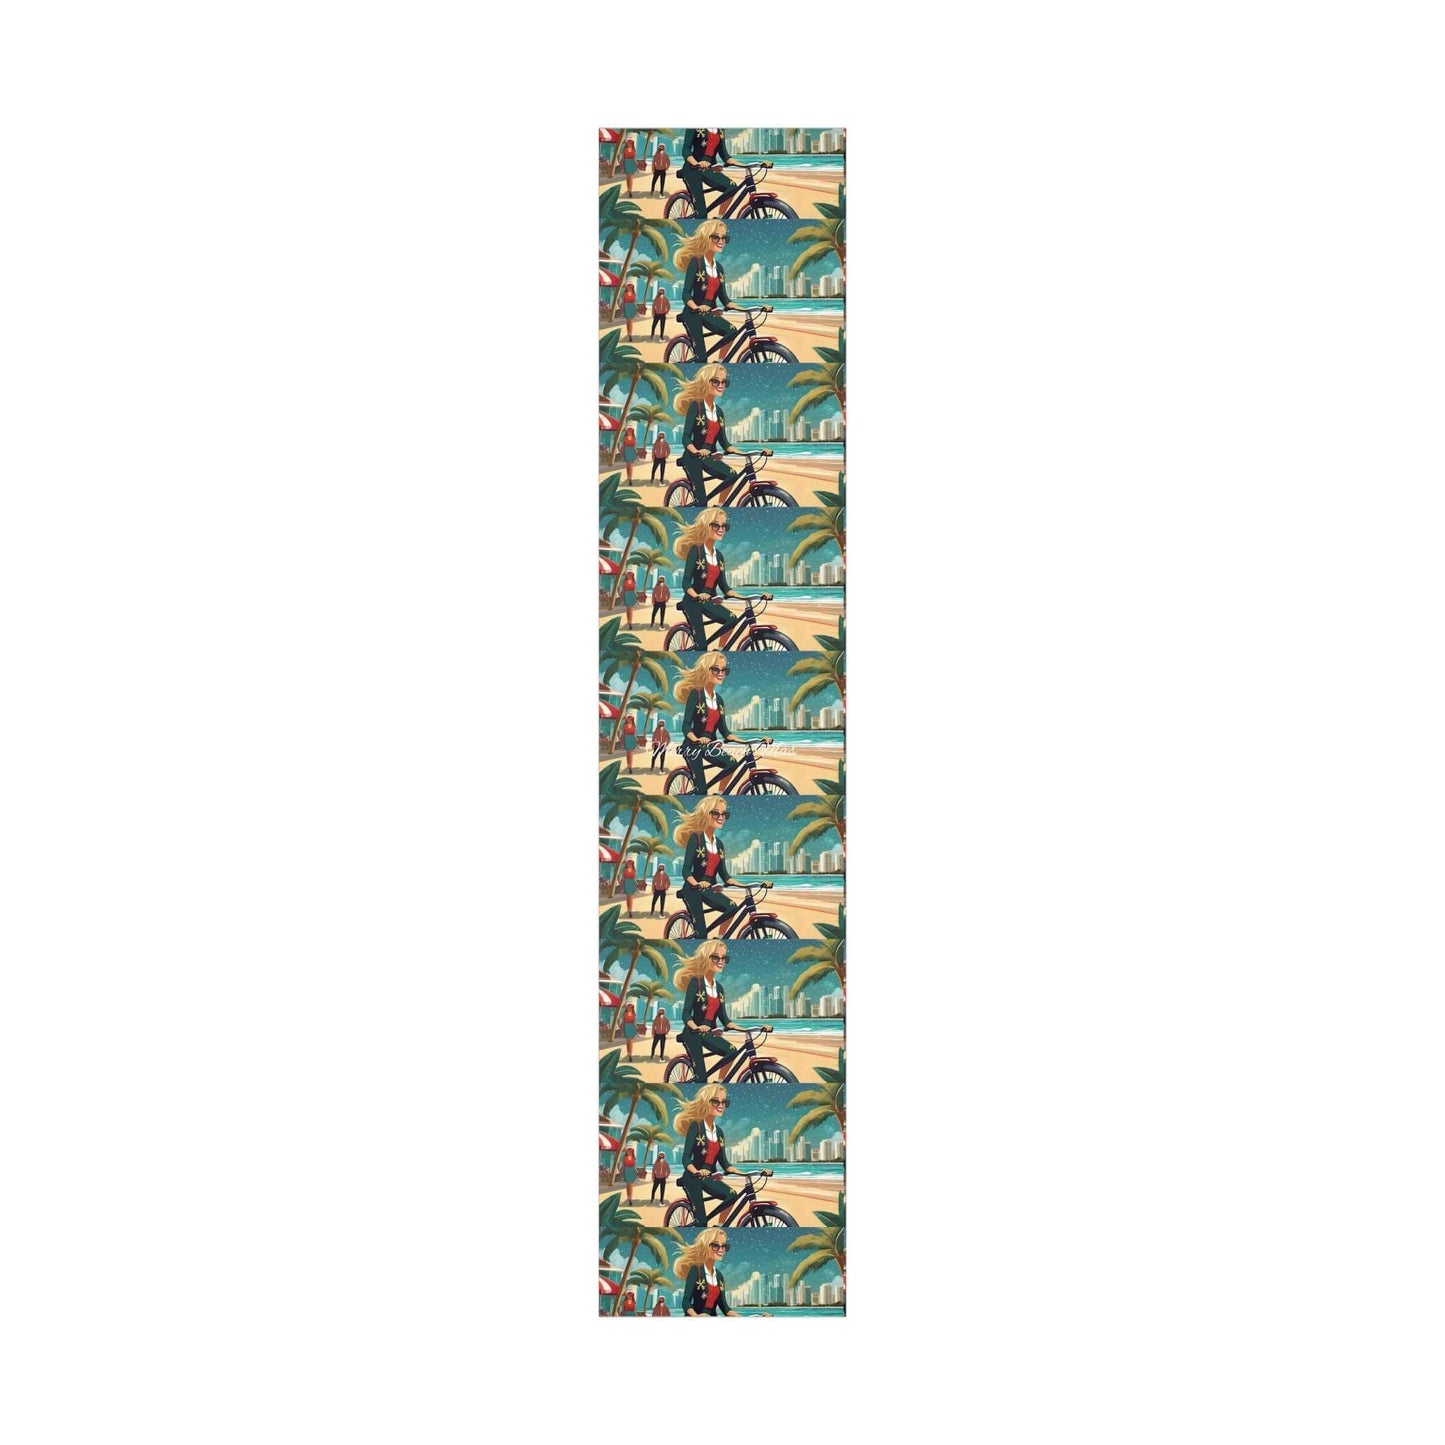 City Girl Ebike Electric Bikebabe Christmas Wrap Papers